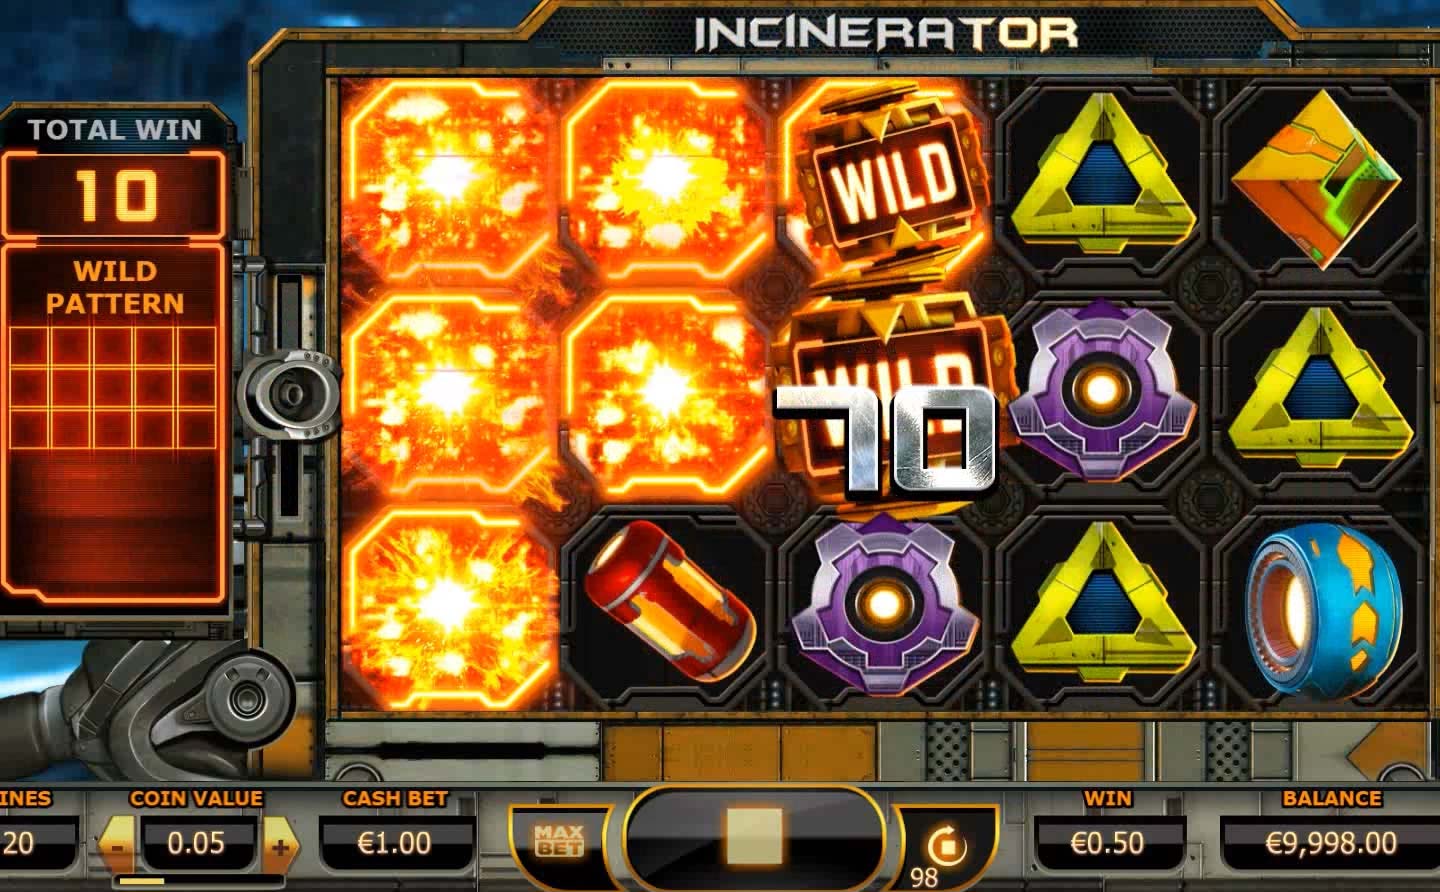 Rules of the game Incinerator